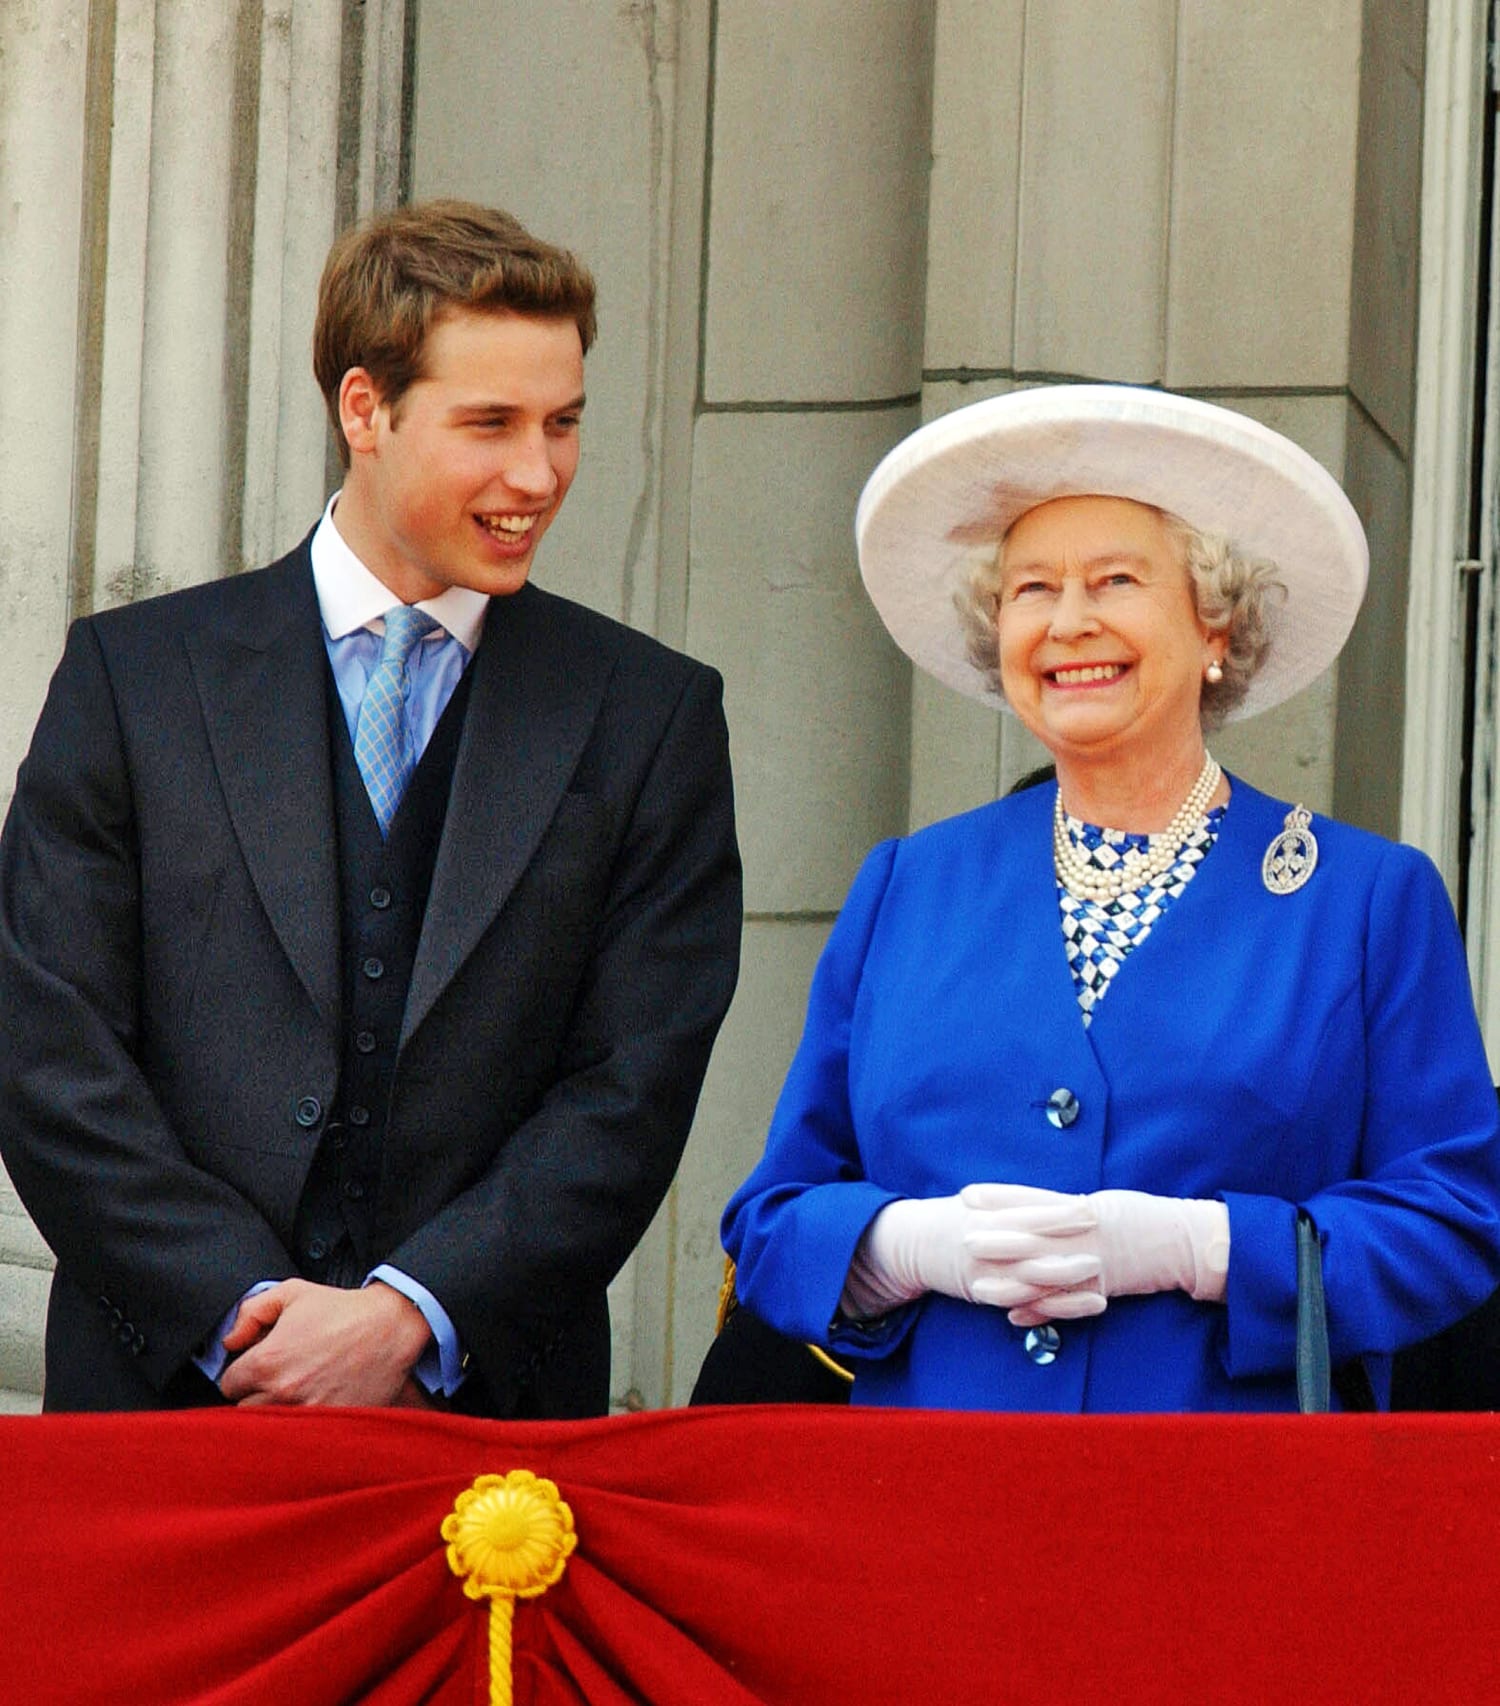 Prince William issues 1st public statement after of 'extraordinary' grandmother Queen Elizabeth